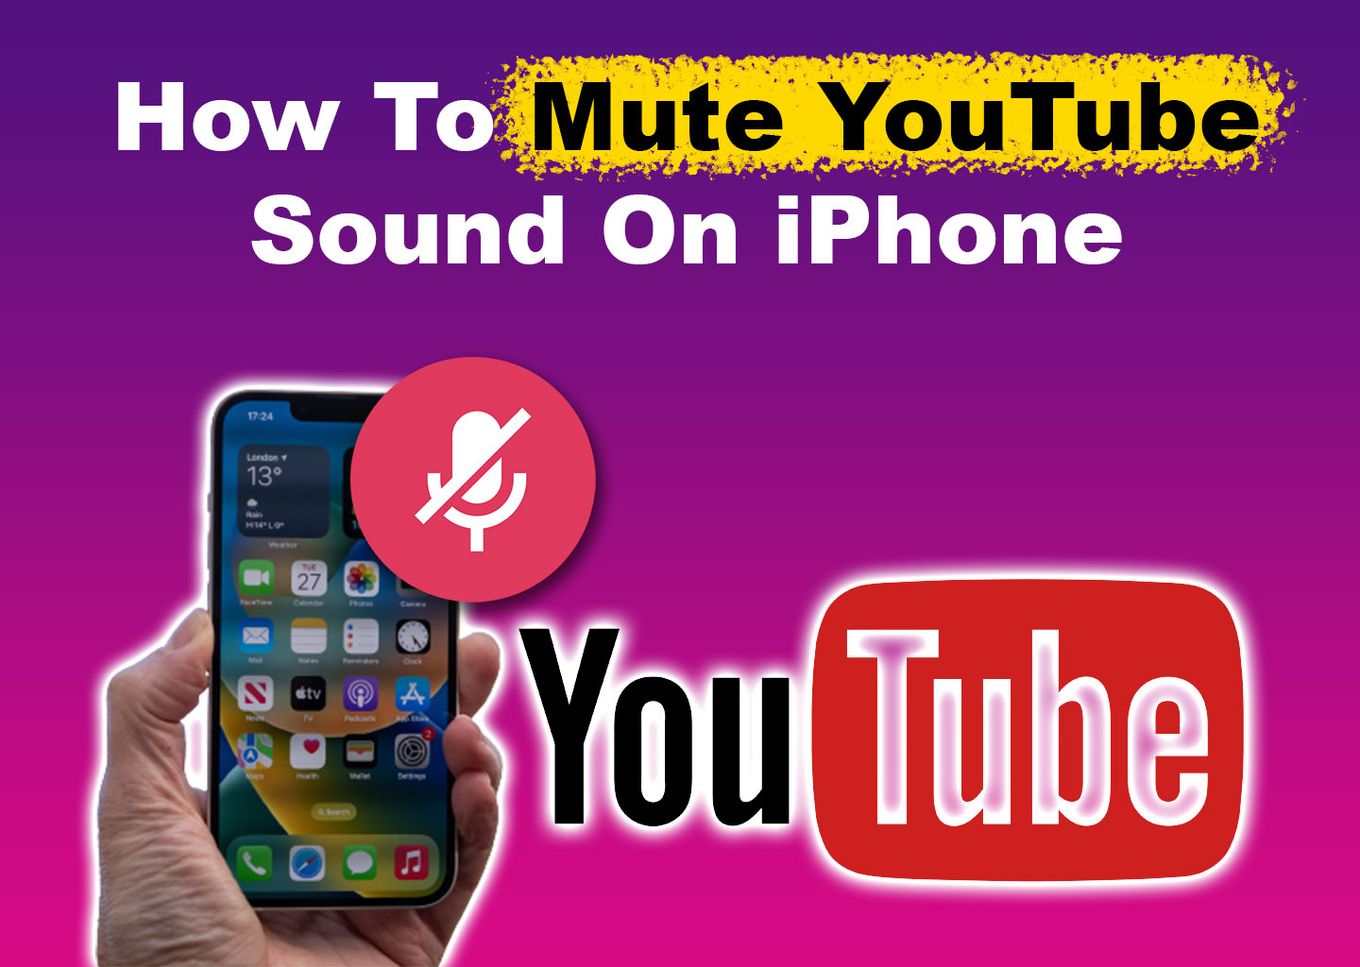 How to Mute YouTube Sound on iPhone